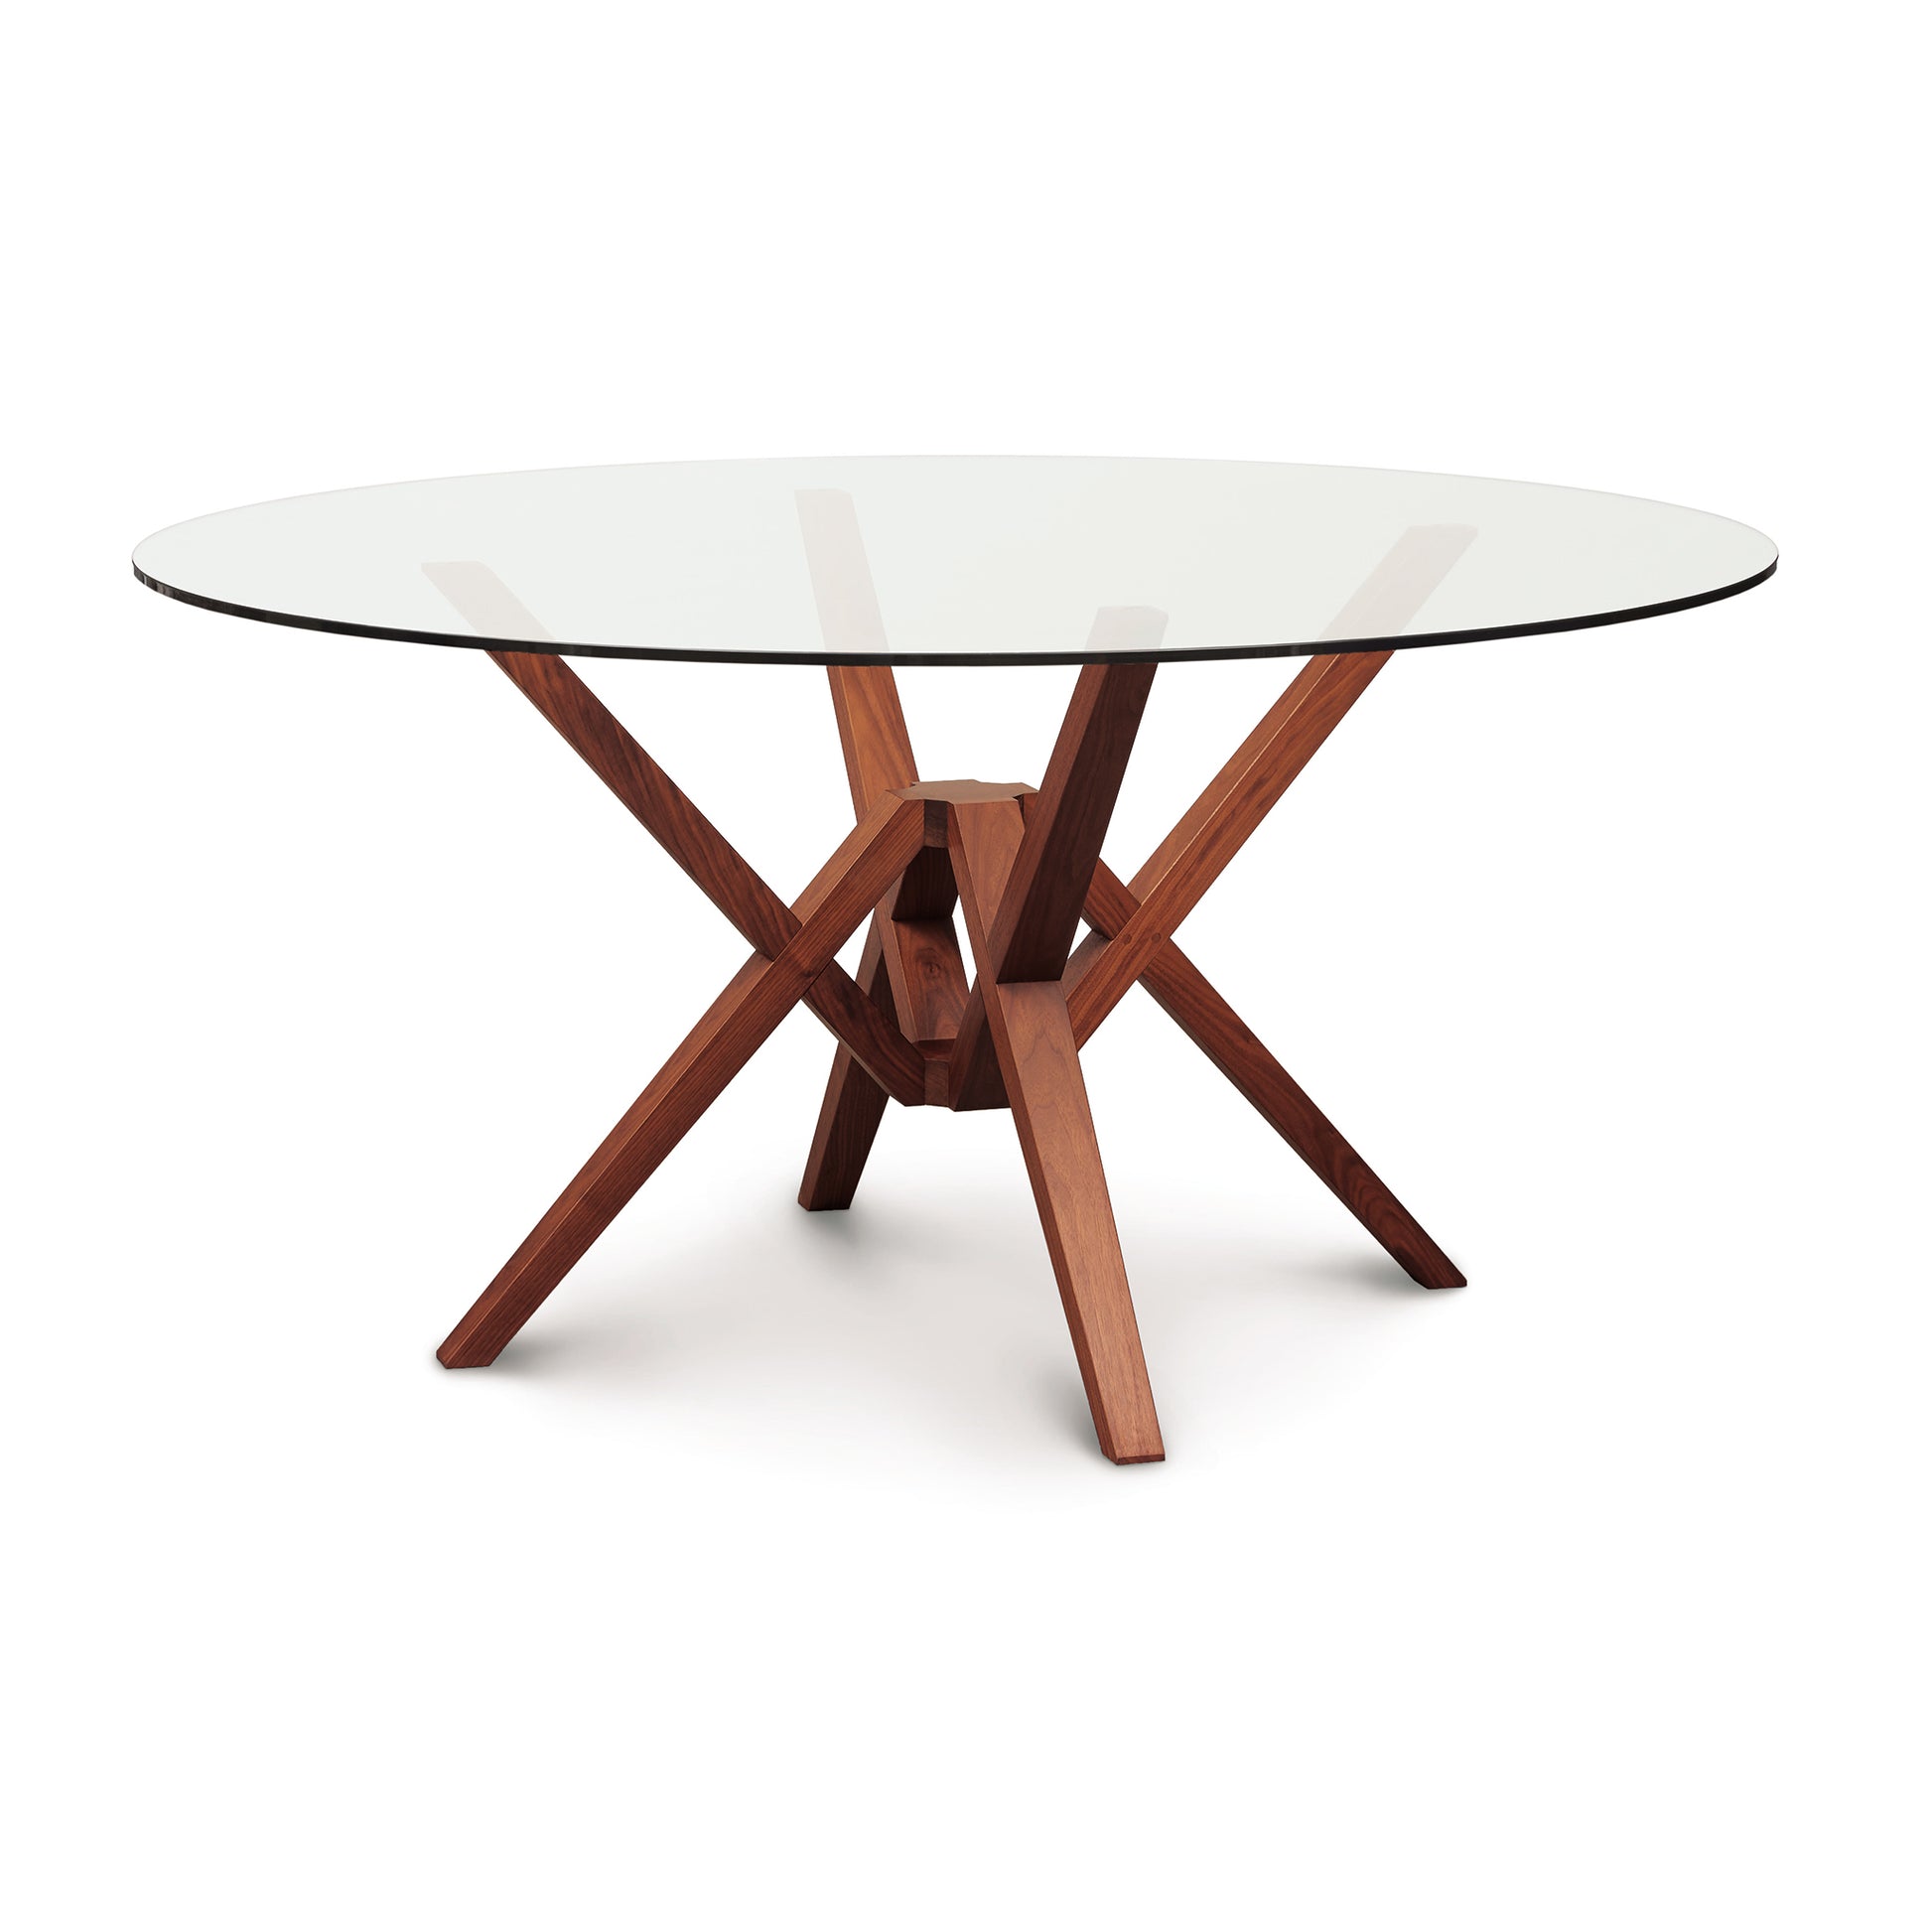 The Copeland Furniture Exeter Round Glass Top Table combines innovative engineering and an isometric design, featuring a round glass top and elegant wooden legs.